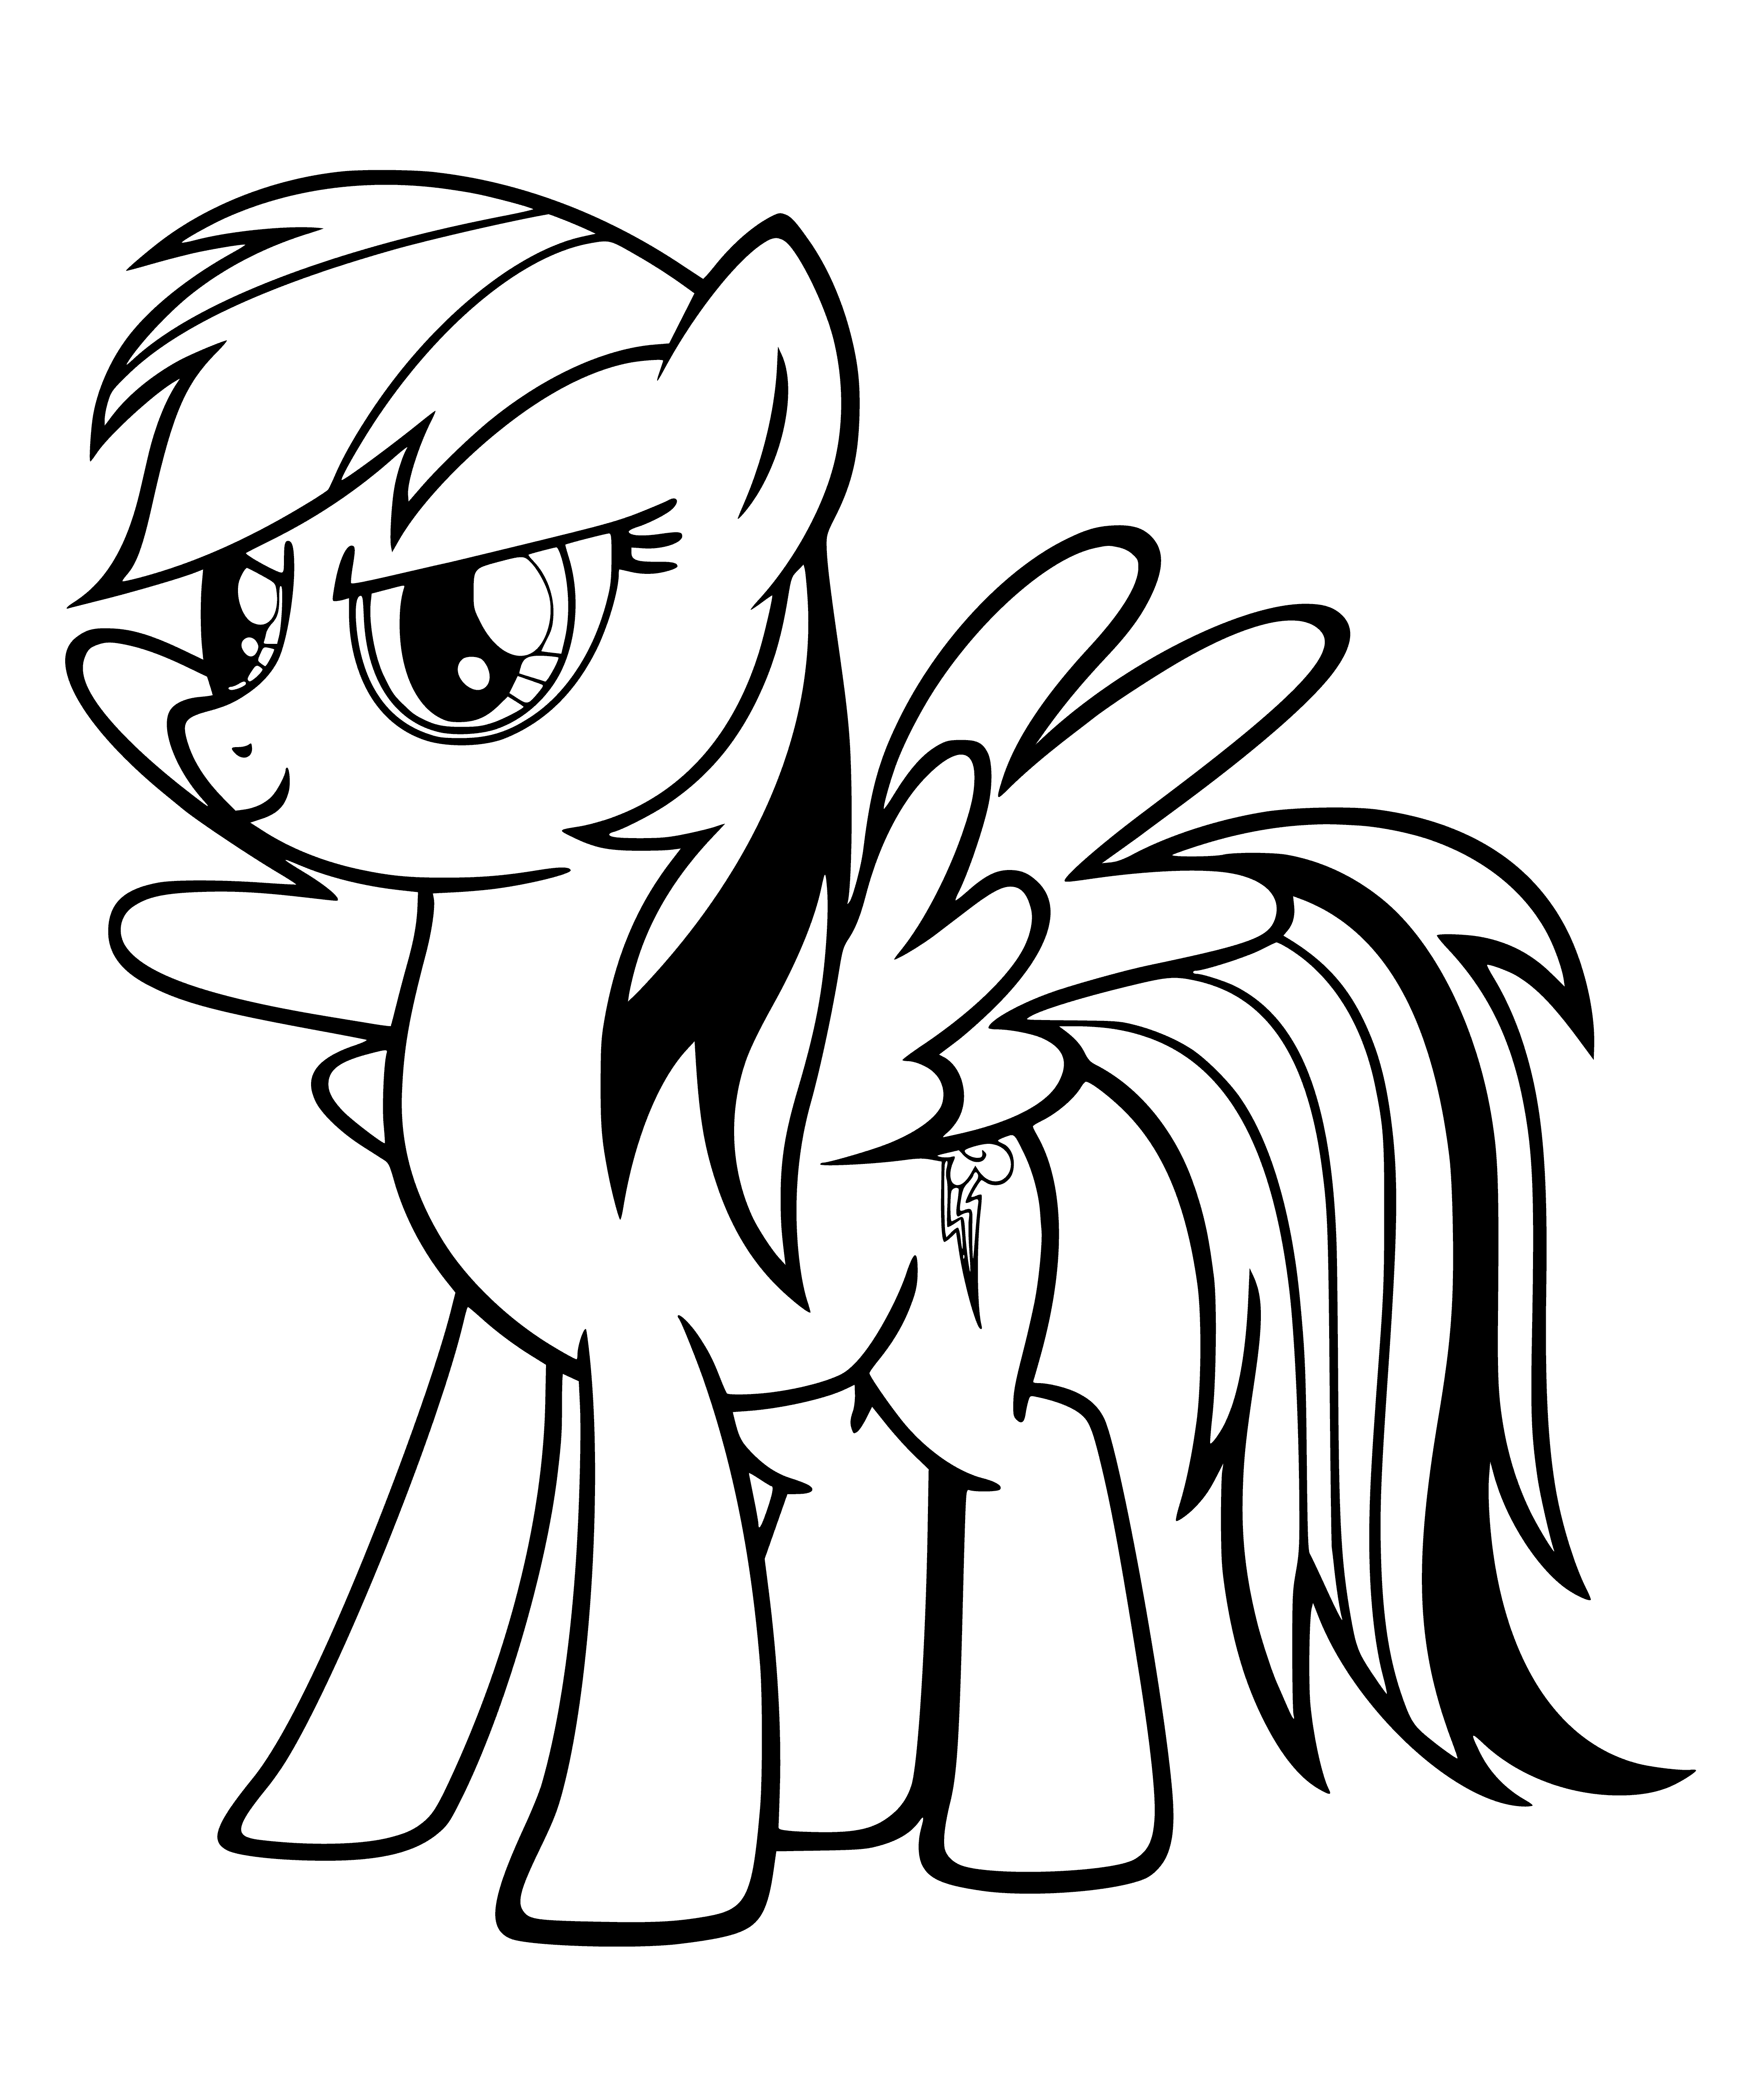 coloring page: Cartoon character Rainbow Dash, blue humanoid pony with rainbow-colored mane/tail, is wearing yellow/orange sleeveless shirt & black belt with silver buckle.